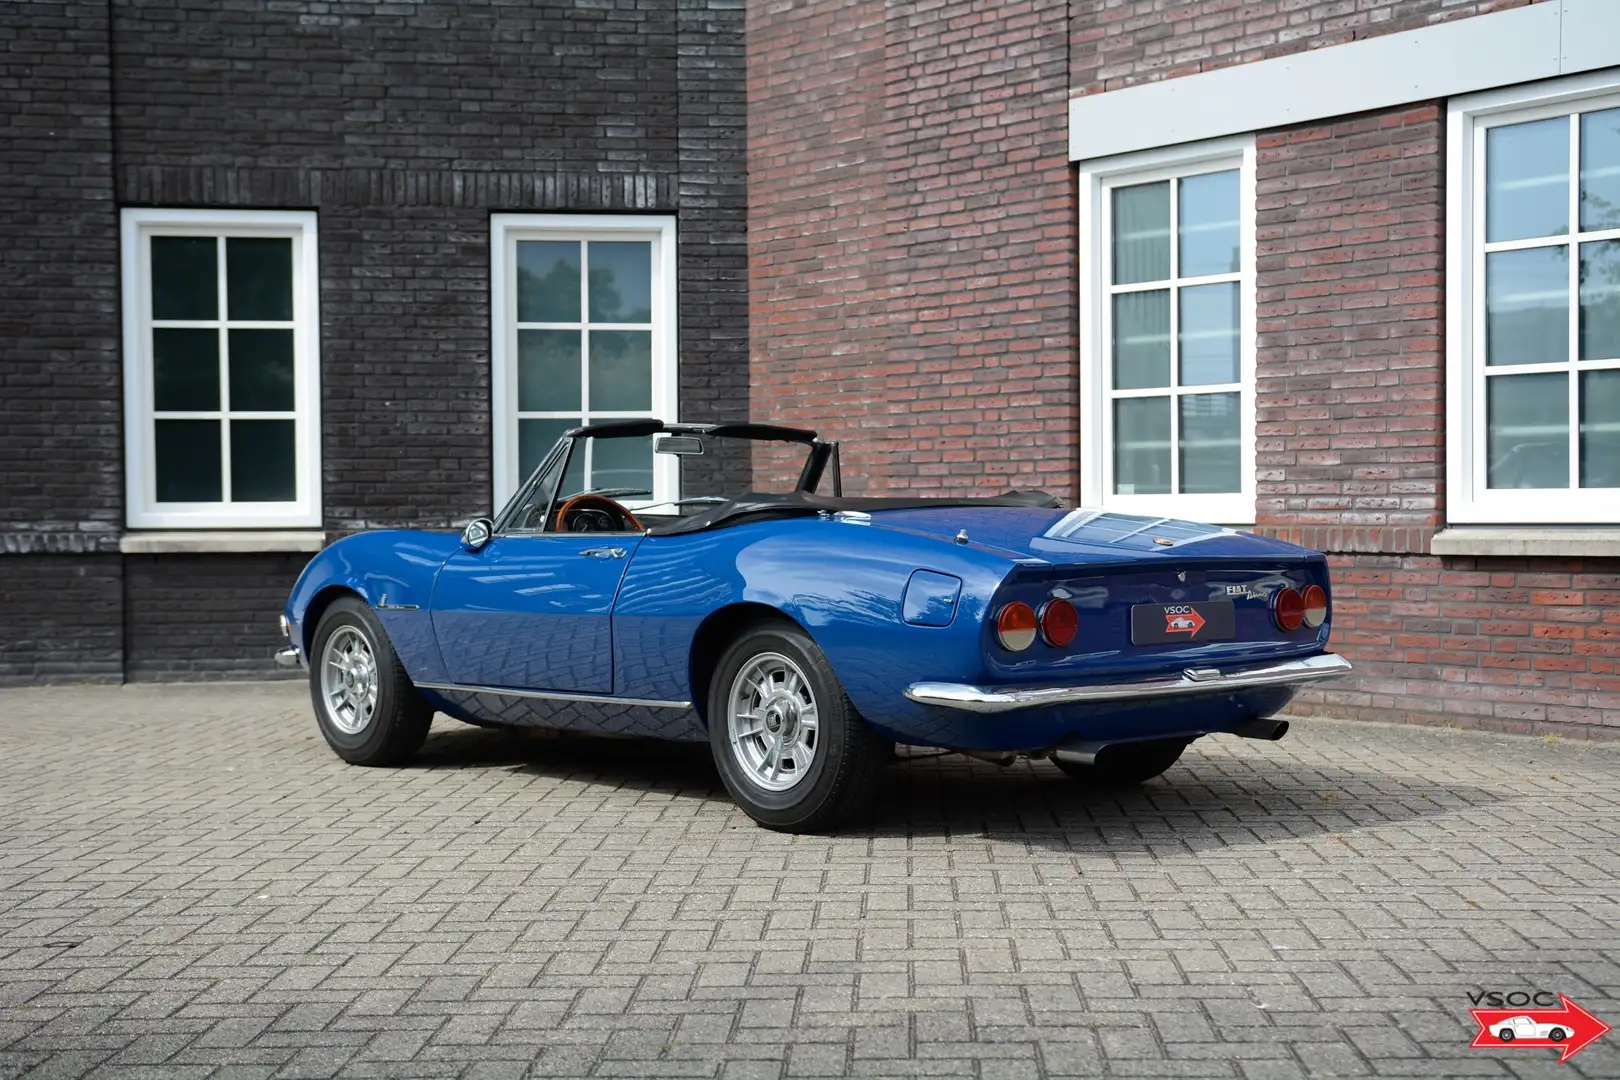 Fiat Dino Spyder 2000 - now reduced in price - 1967 Blue - 2